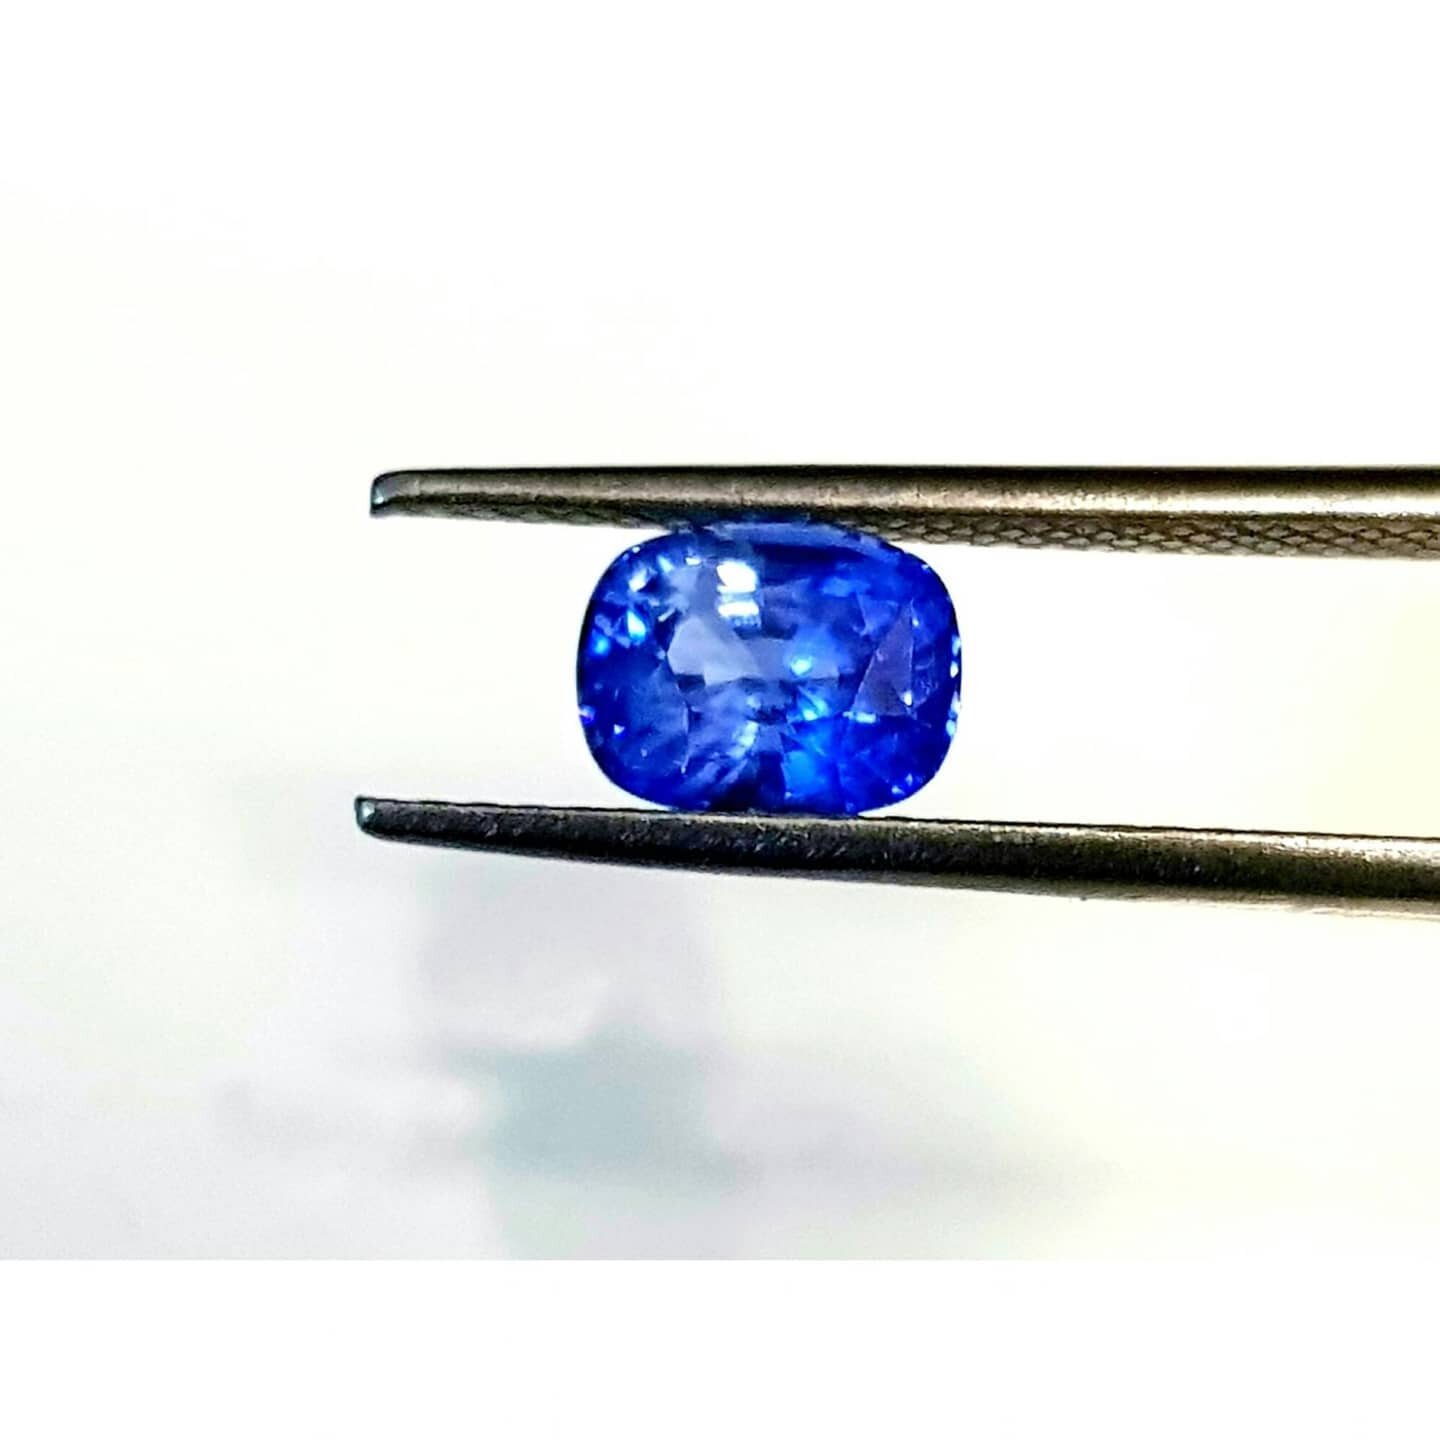 Feeling blue? That's ok so does this ceylon sapphire 😊 If this fabulous rock was yours what would you make it into? #designtime #isolationdesignchallenge #isolationcreation
.
.
.
.
#customdesigner #jewellerydesigner #freelancejewellerydesigner #bris